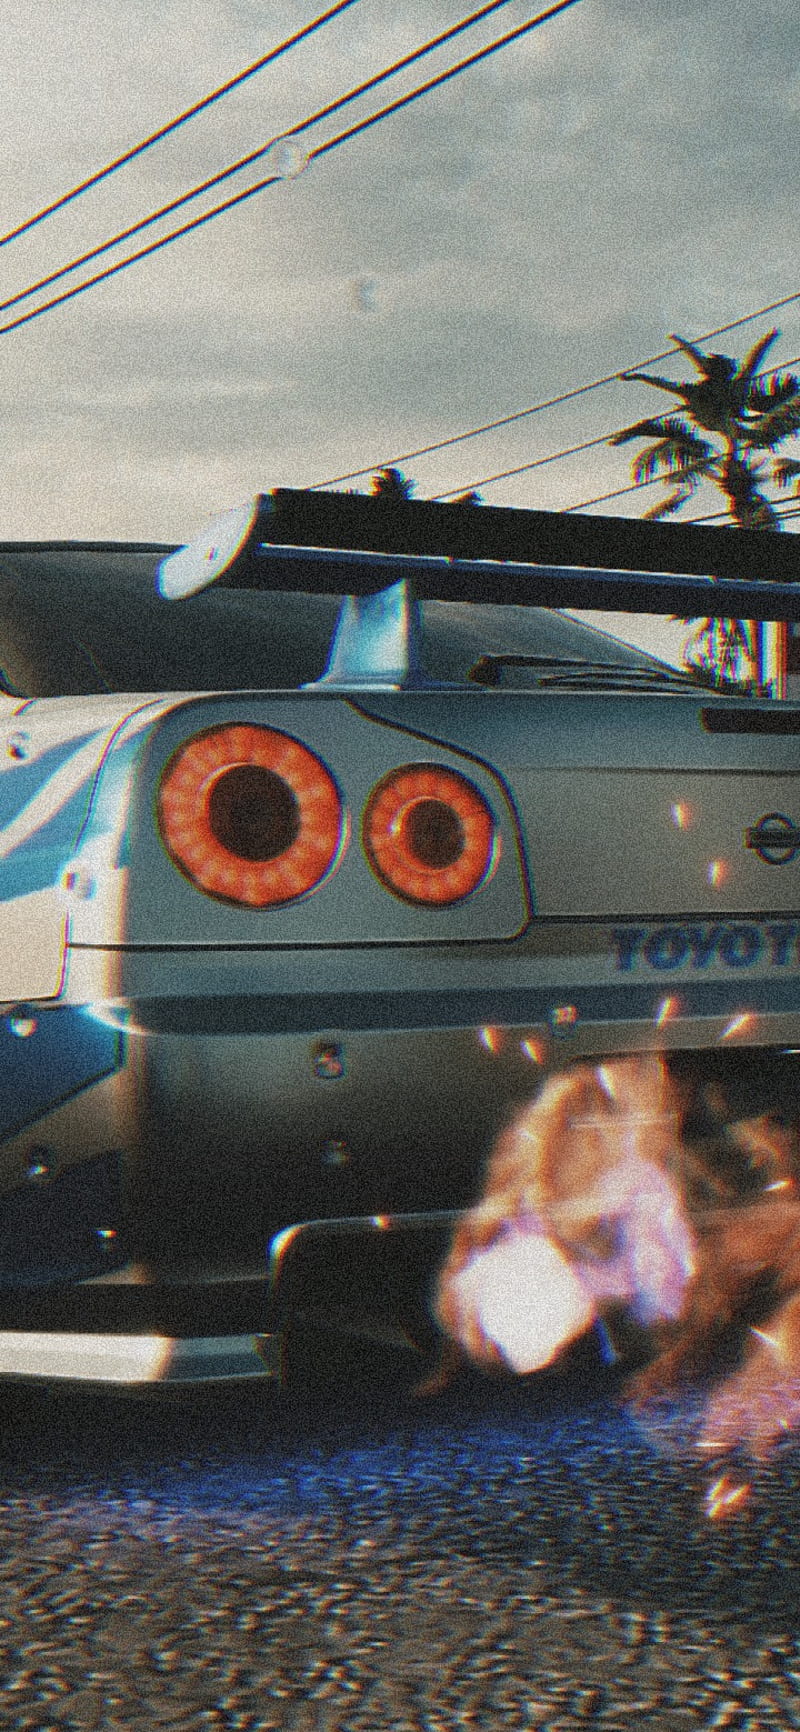 GTR 34, brian, fast and furious, gtr34, need for speed, need for speed heat, nfs, pioneer, skyline, vintage, HD phone wallpaper